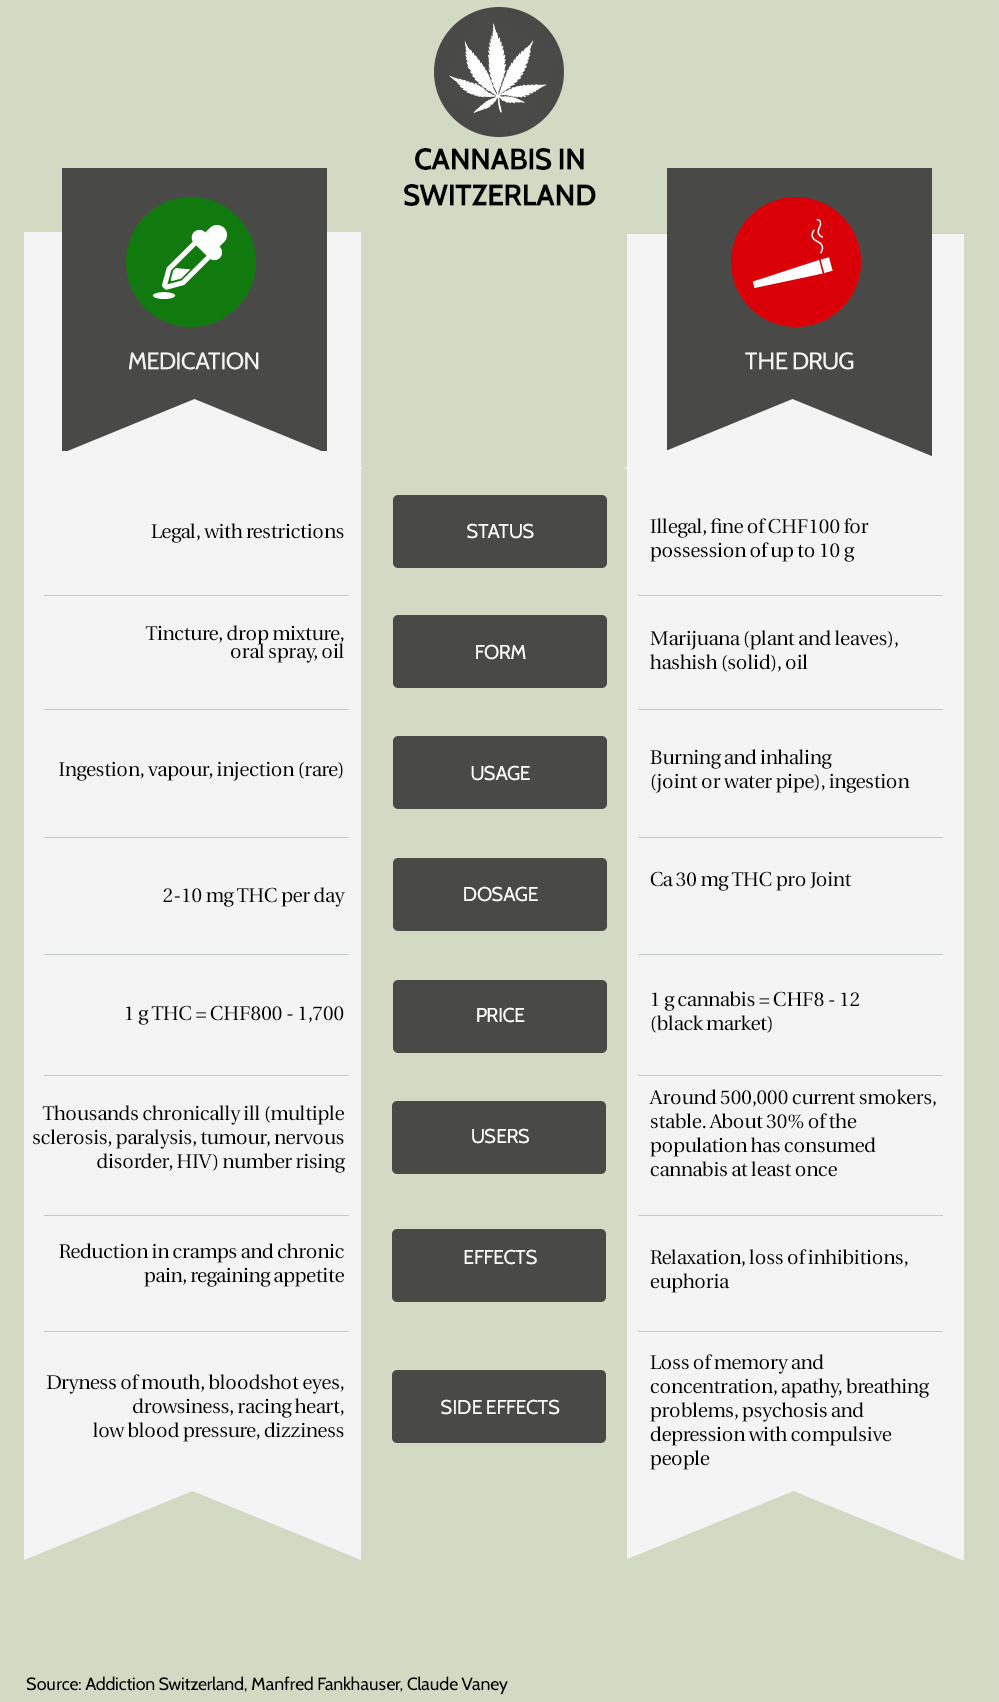 Graphic showing the differences between medical and recreational cannabis use.